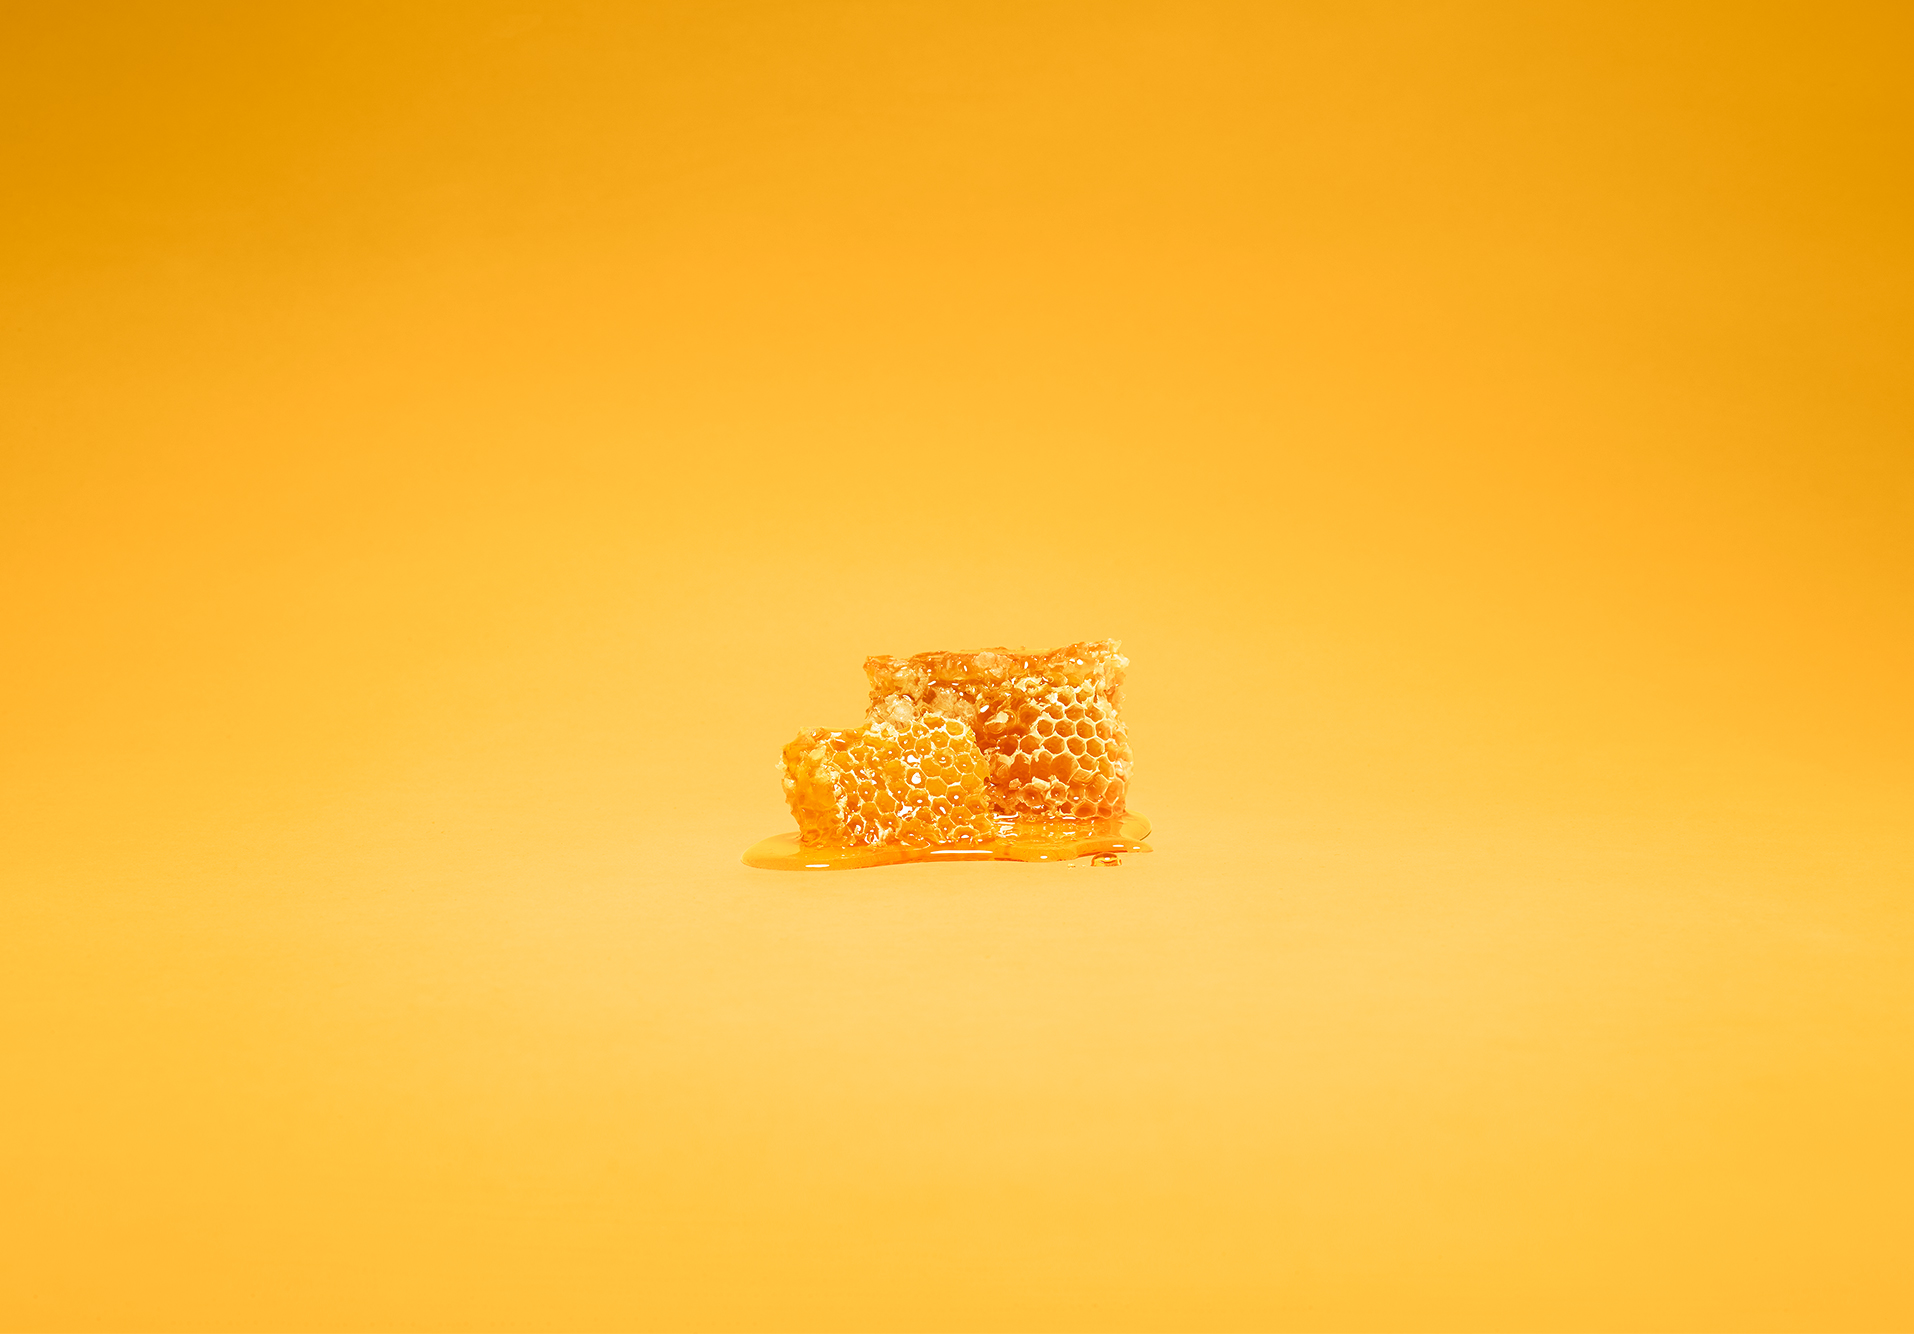 Android (operating System), Honeycombs Wallpaper